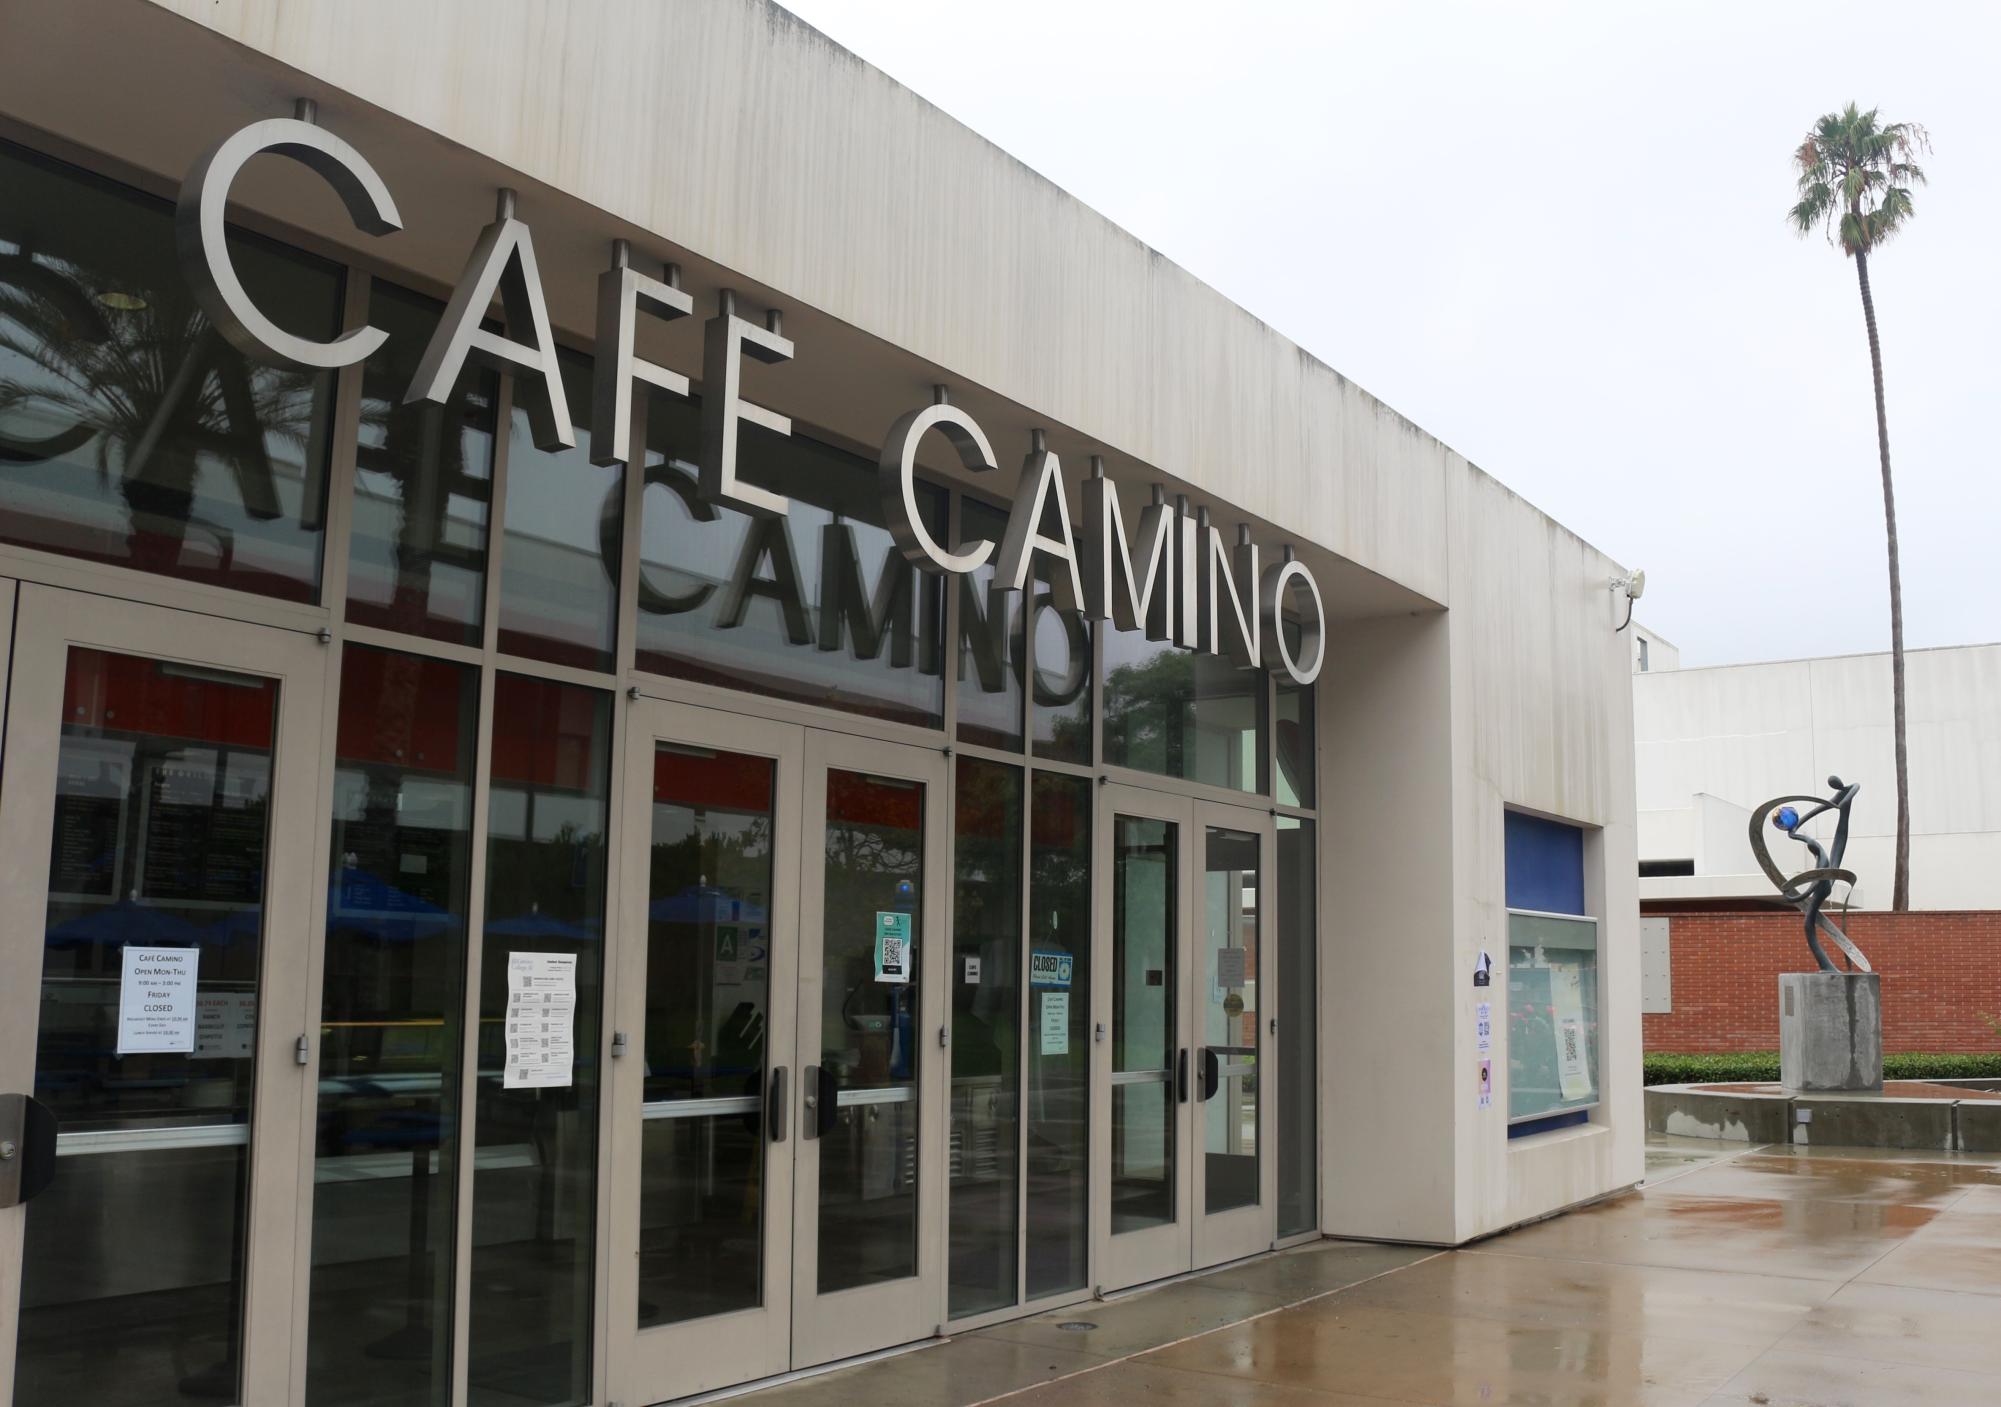 Café Camino, one of two on campus dining options for El Camino College Students sits closed and empty on Saturday, Sept 2. Neither of the two on campus restaurants is open on the weekends. (Delfino Camacho | The Union)